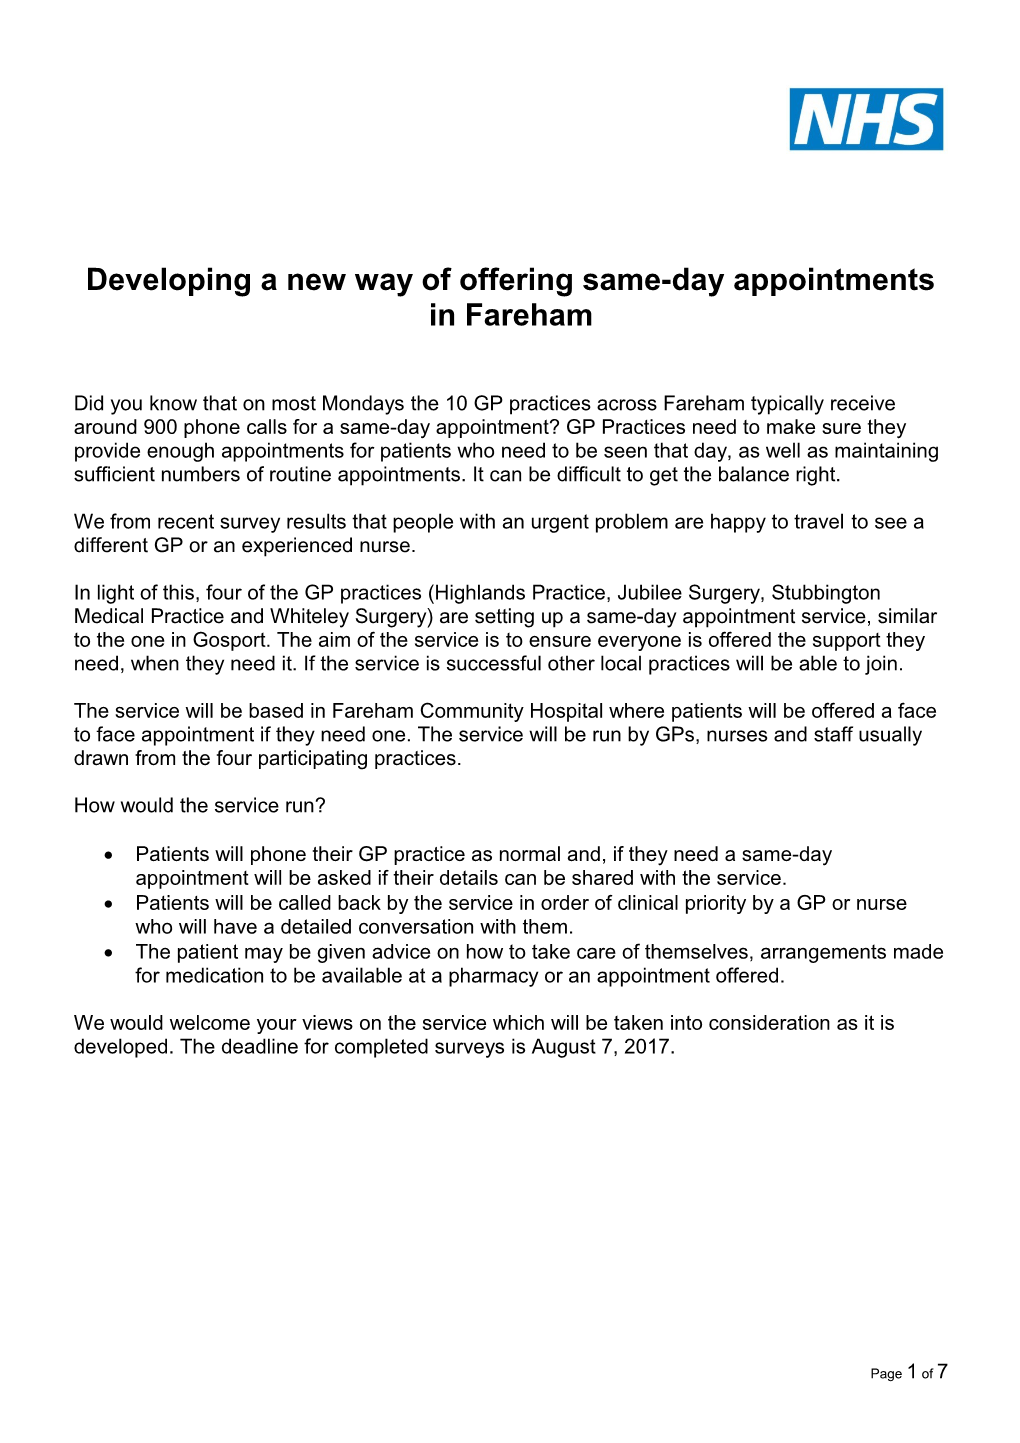 Developing a New Way of Offering Same-Day Appointments in Fareham